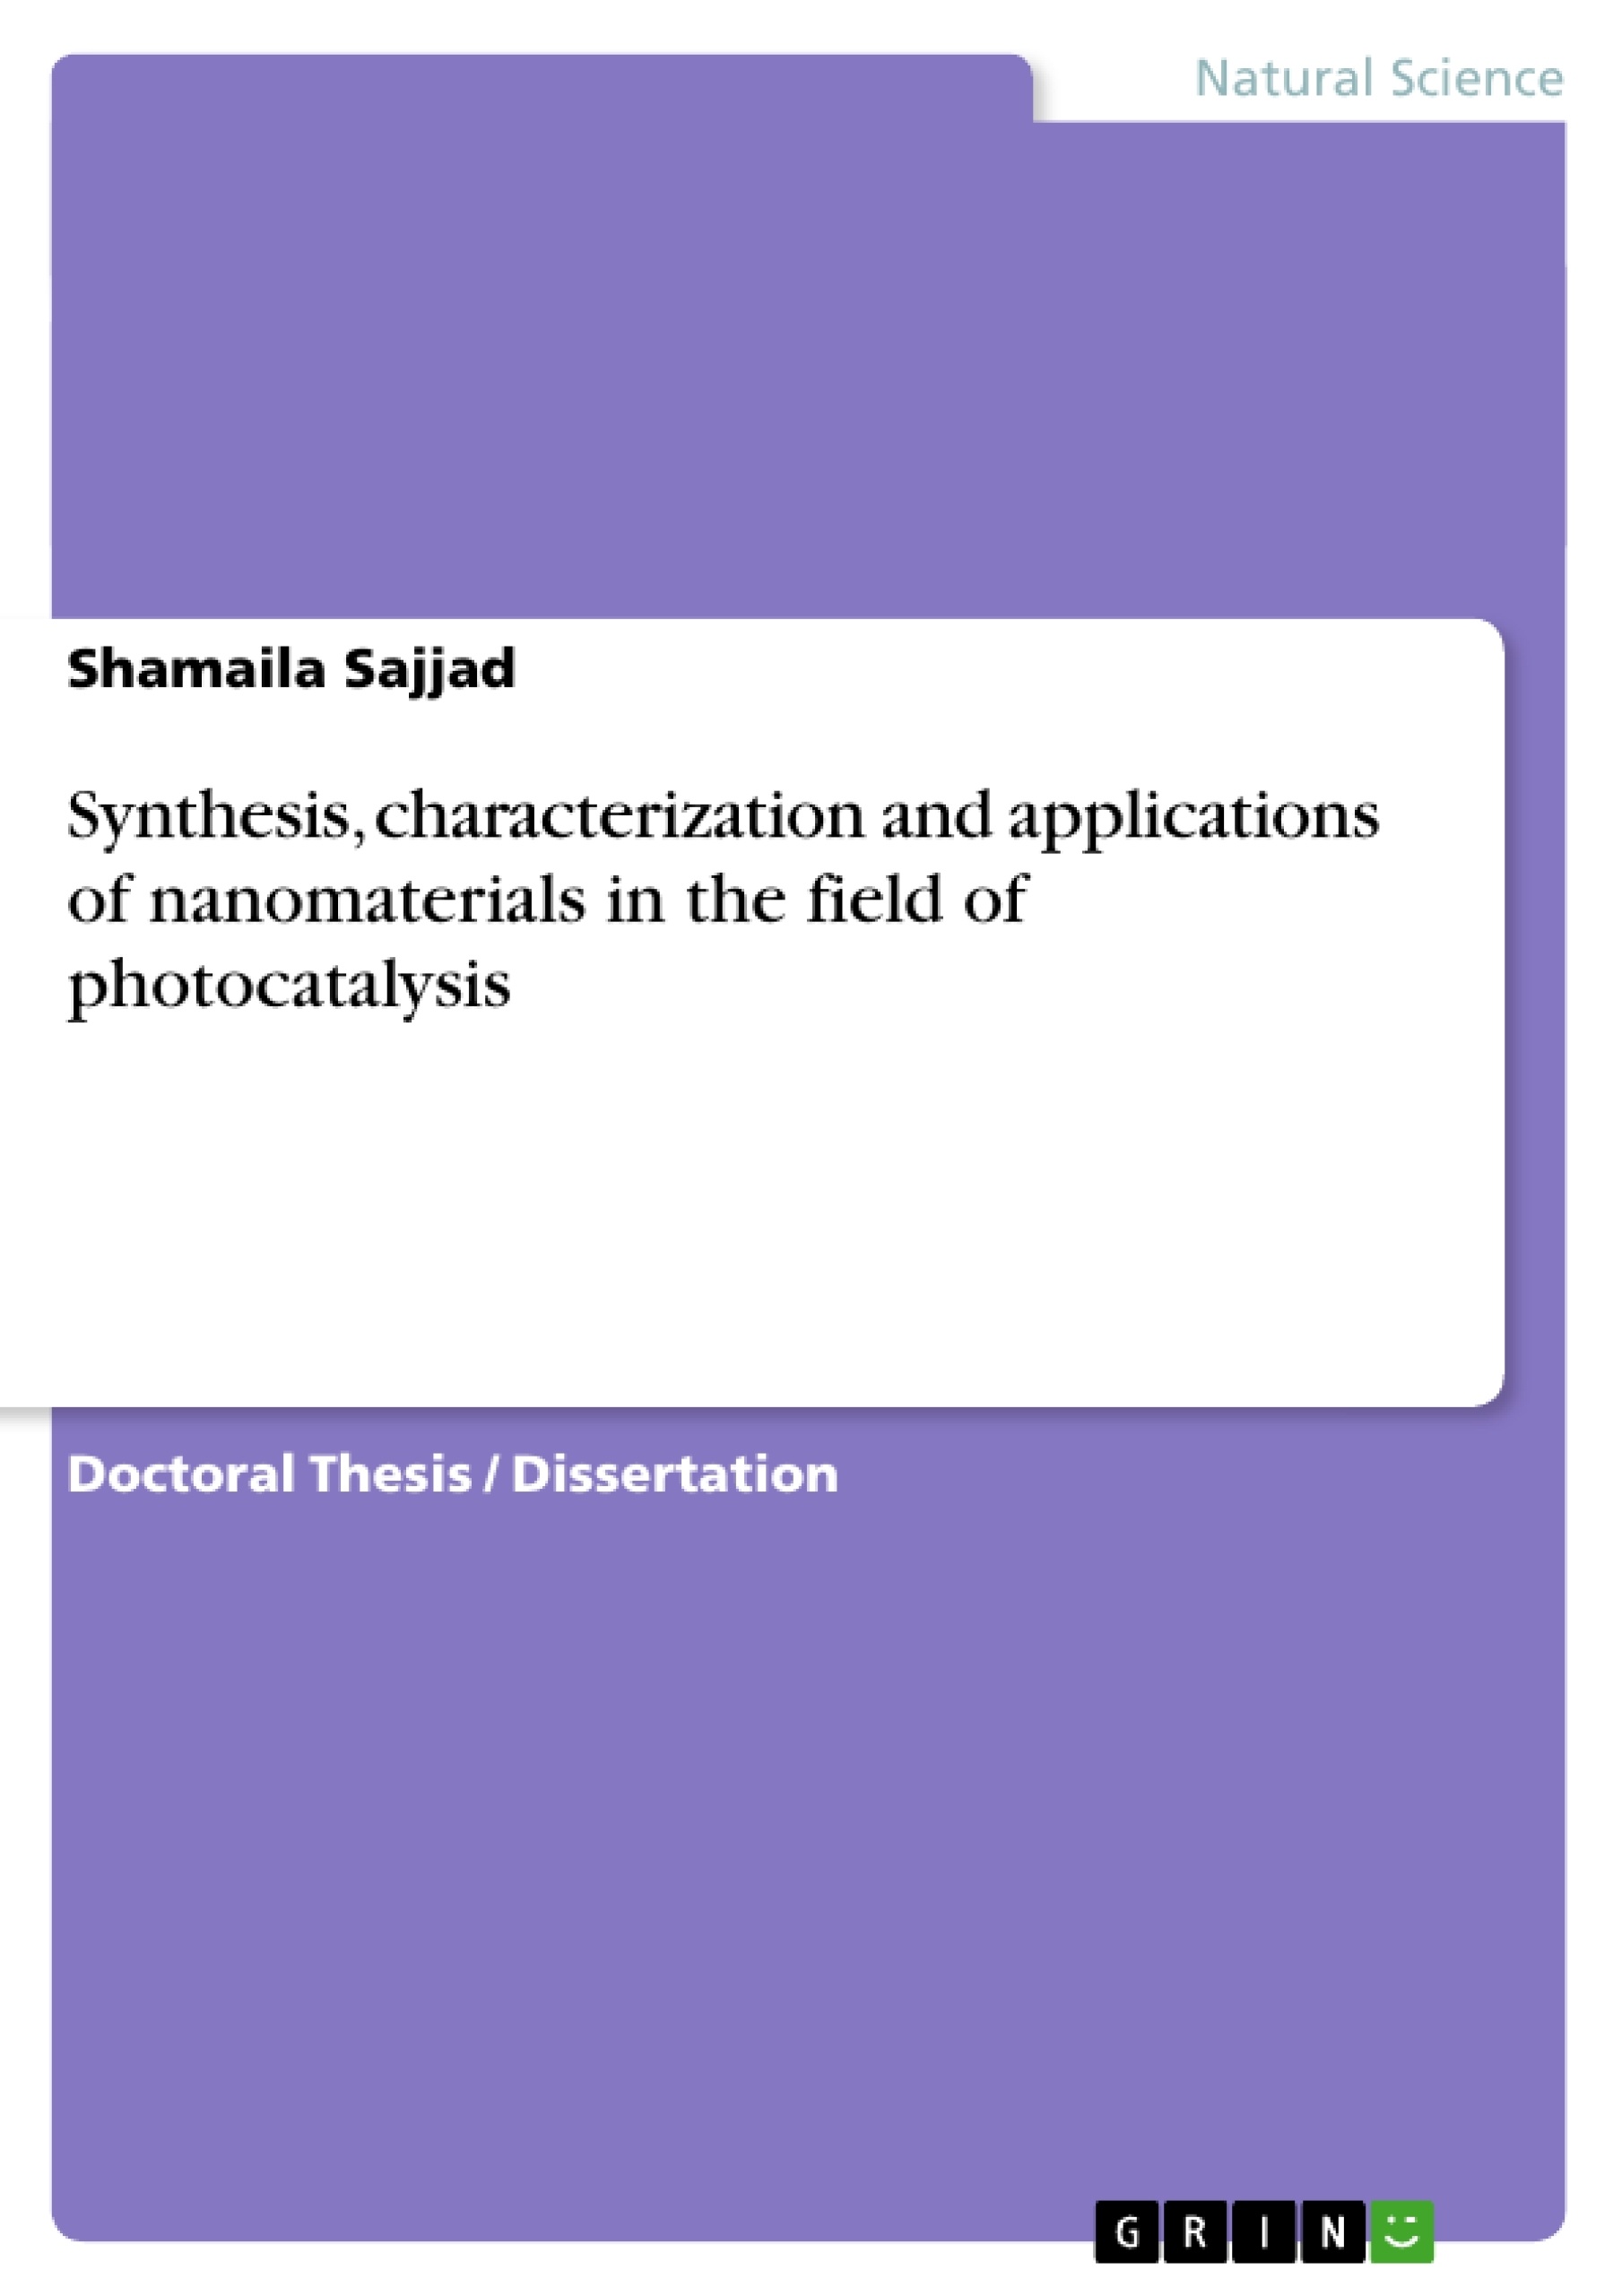 Título: Synthesis, characterization and applications of nanomaterials in the field of photocatalysis